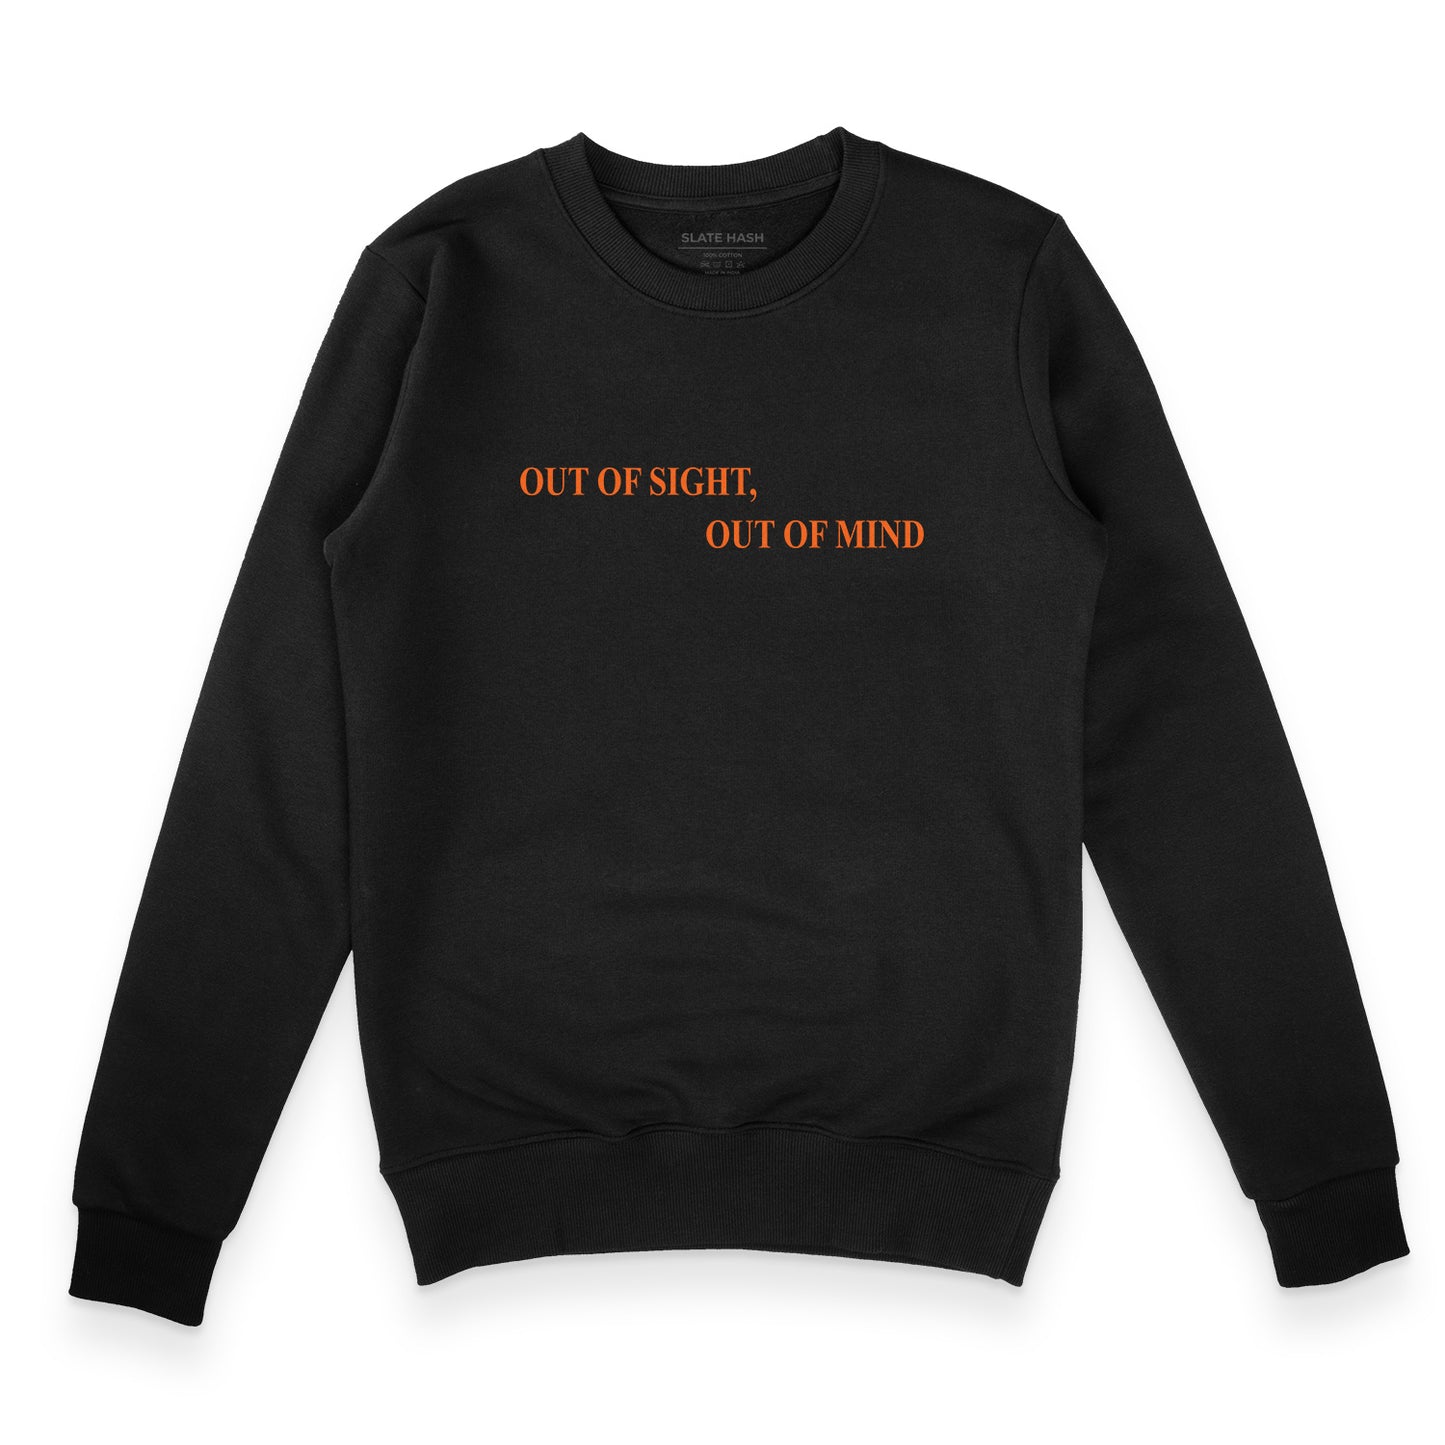 Out of sight out of mind Sweatshirt